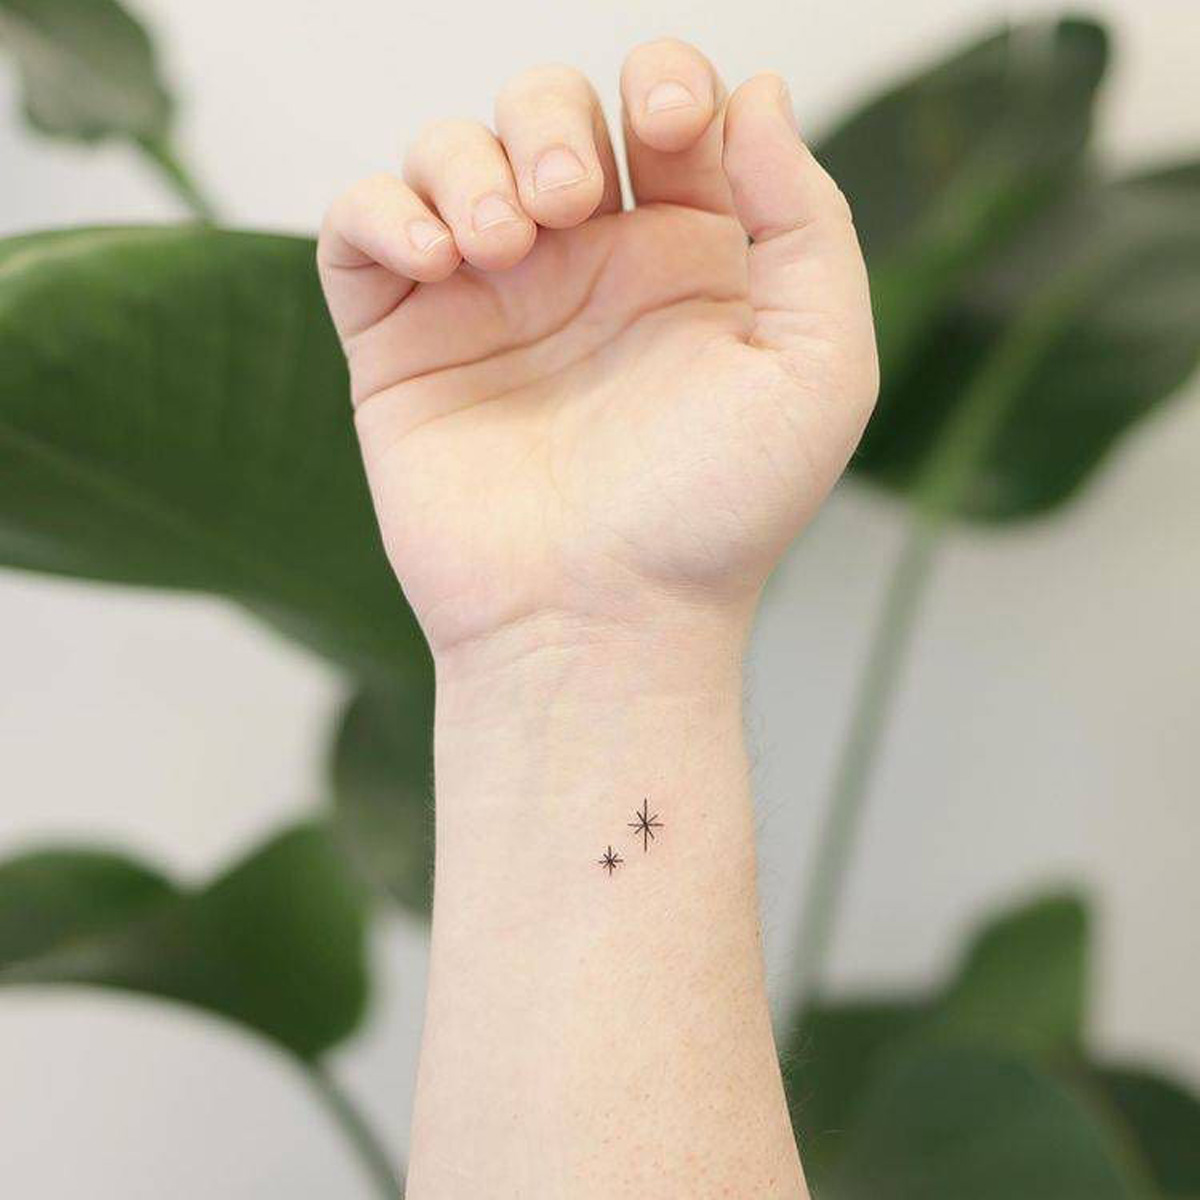 10 Small Wrist Tattoo Ideas With Simple Meanings